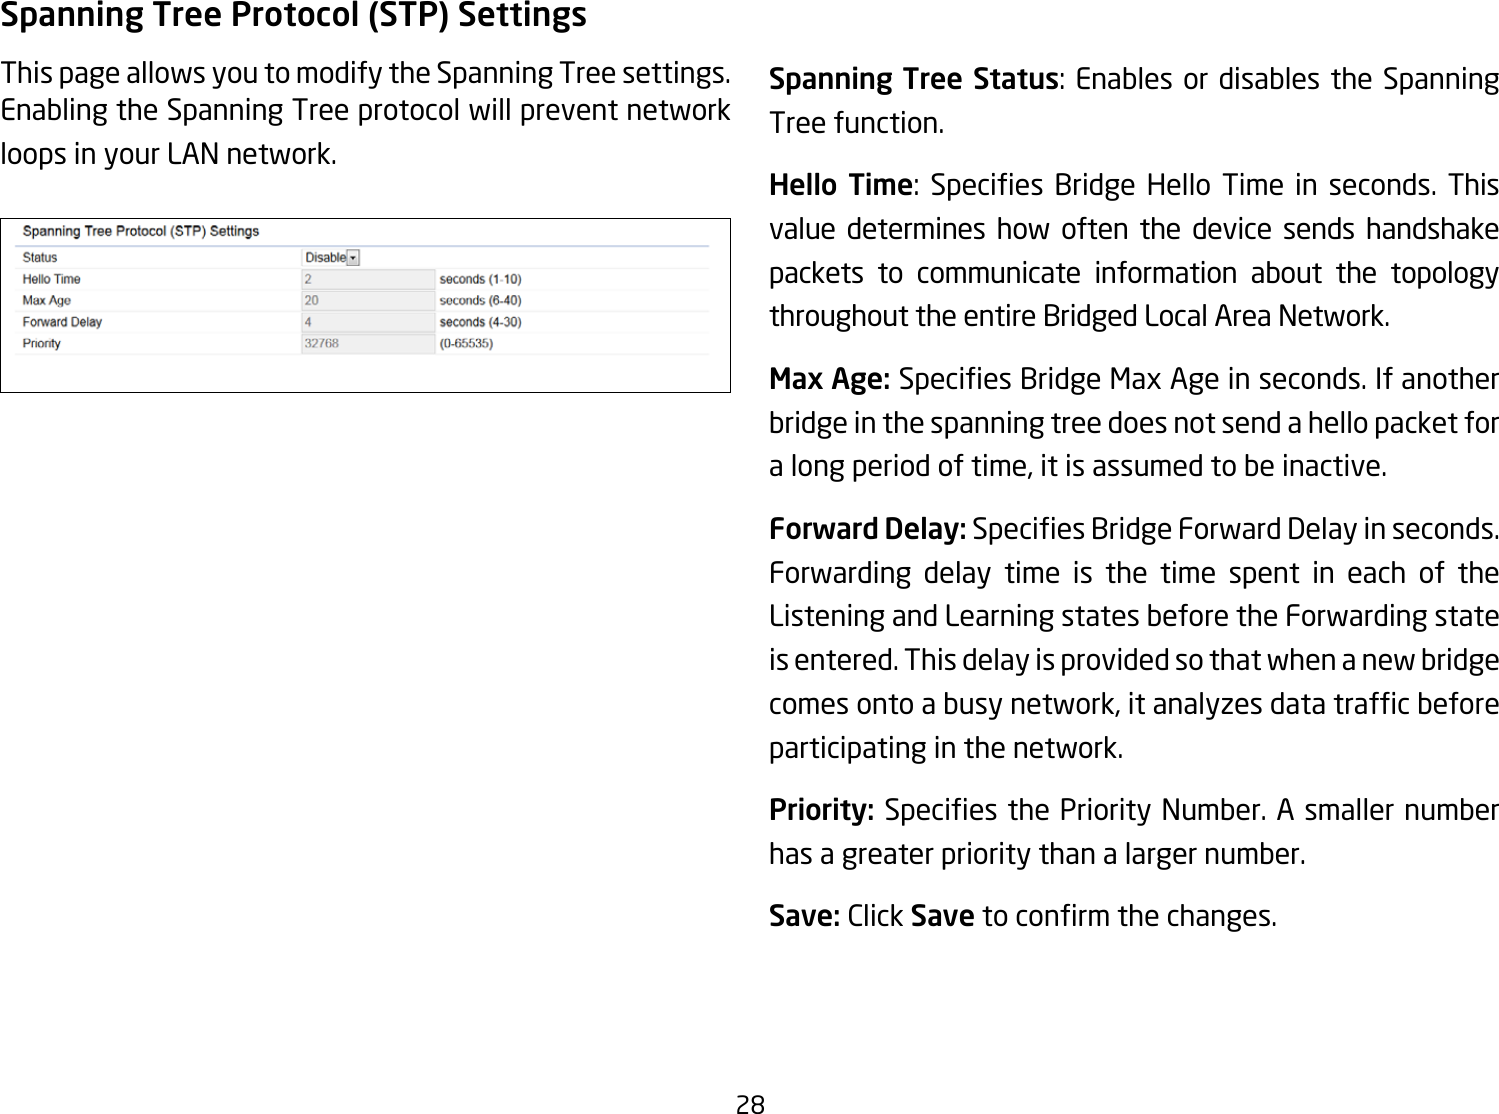 28Spanning Tree Protocol (STP) SettingsThis page allows you to modify the Spanning Tree settings. Enabling the Spanning Tree protocol will prevent network loops in your LAN network. Spanning Tree Status: Enables or disables the Spanning Tree function.Hello Time: Species Bridge Hello Time in seconds. Thisvalue determines how often the device sends handshake packets to communicate information about the topology throughout the entire Bridged Local Area Network.Max Age: SpeciesBridgeMaxAgeinseconds.Ifanotherbridge in the spanning tree does not send a hello packet for a long period of time, it is assumed to be inactive.Forward Delay:SpeciesBridgeForwardDelayinseconds.Forwarding delay time is the time spent in each of the Listening and Learning states before the Forwarding state is entered. This delay is provided so that when a new bridge comesontoabusynetwork,itanalyzesdatatrafcbeforeparticipating in the network.Priority: SpeciesthePriorityNumber.Asmallernumberhas a greater priority than a larger number.Save: Click Savetoconrmthechanges.